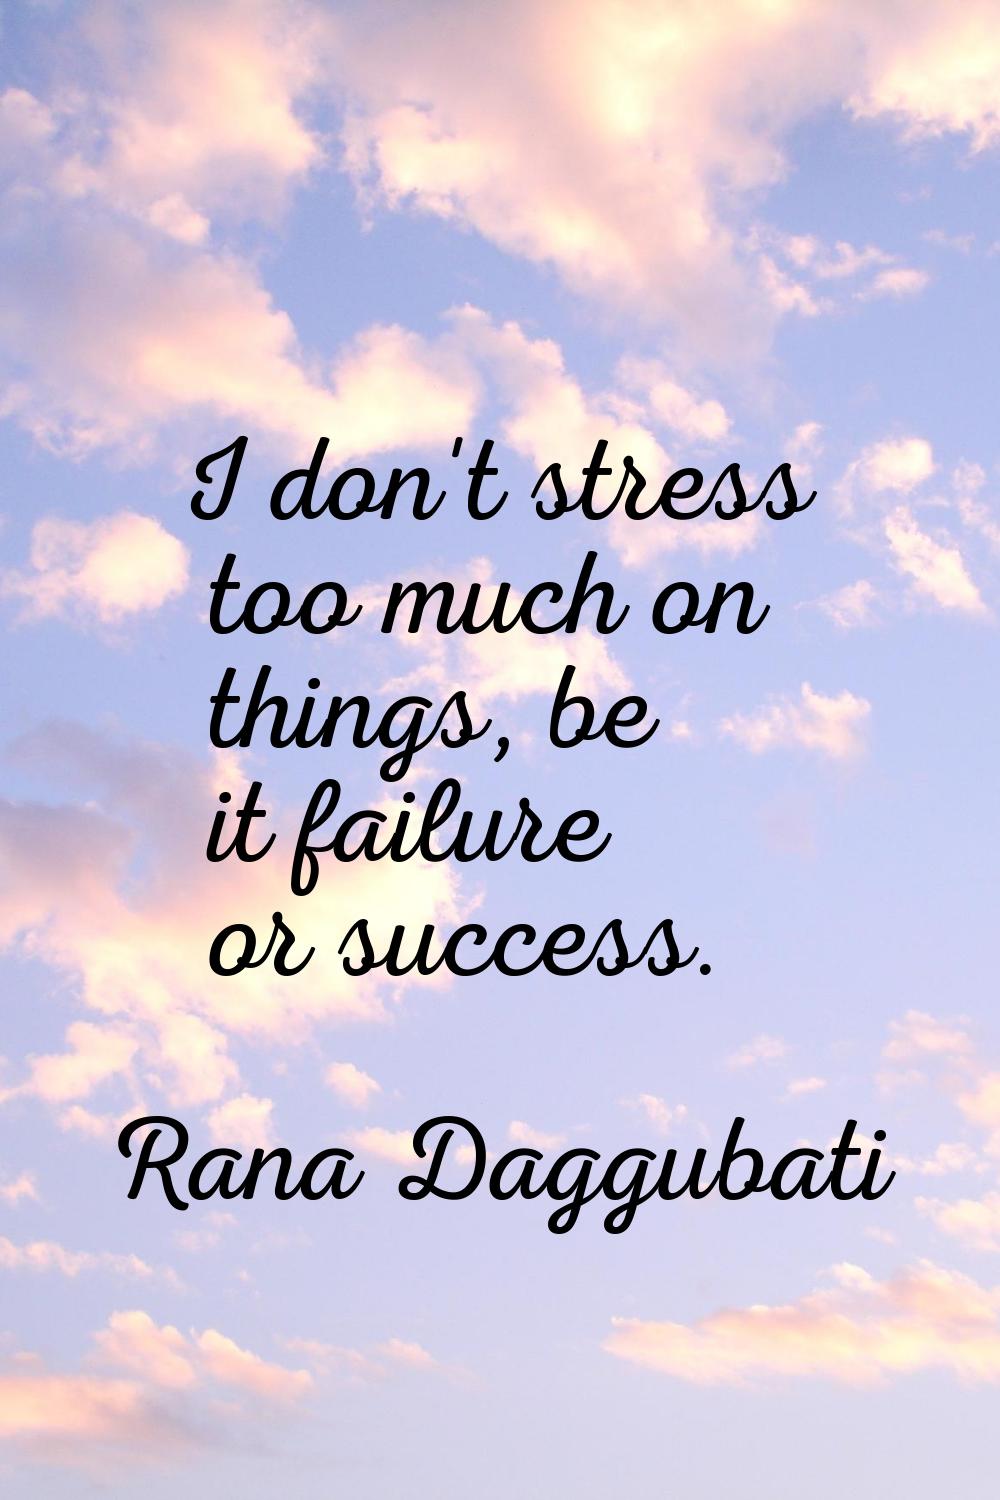 I don't stress too much on things, be it failure or success.